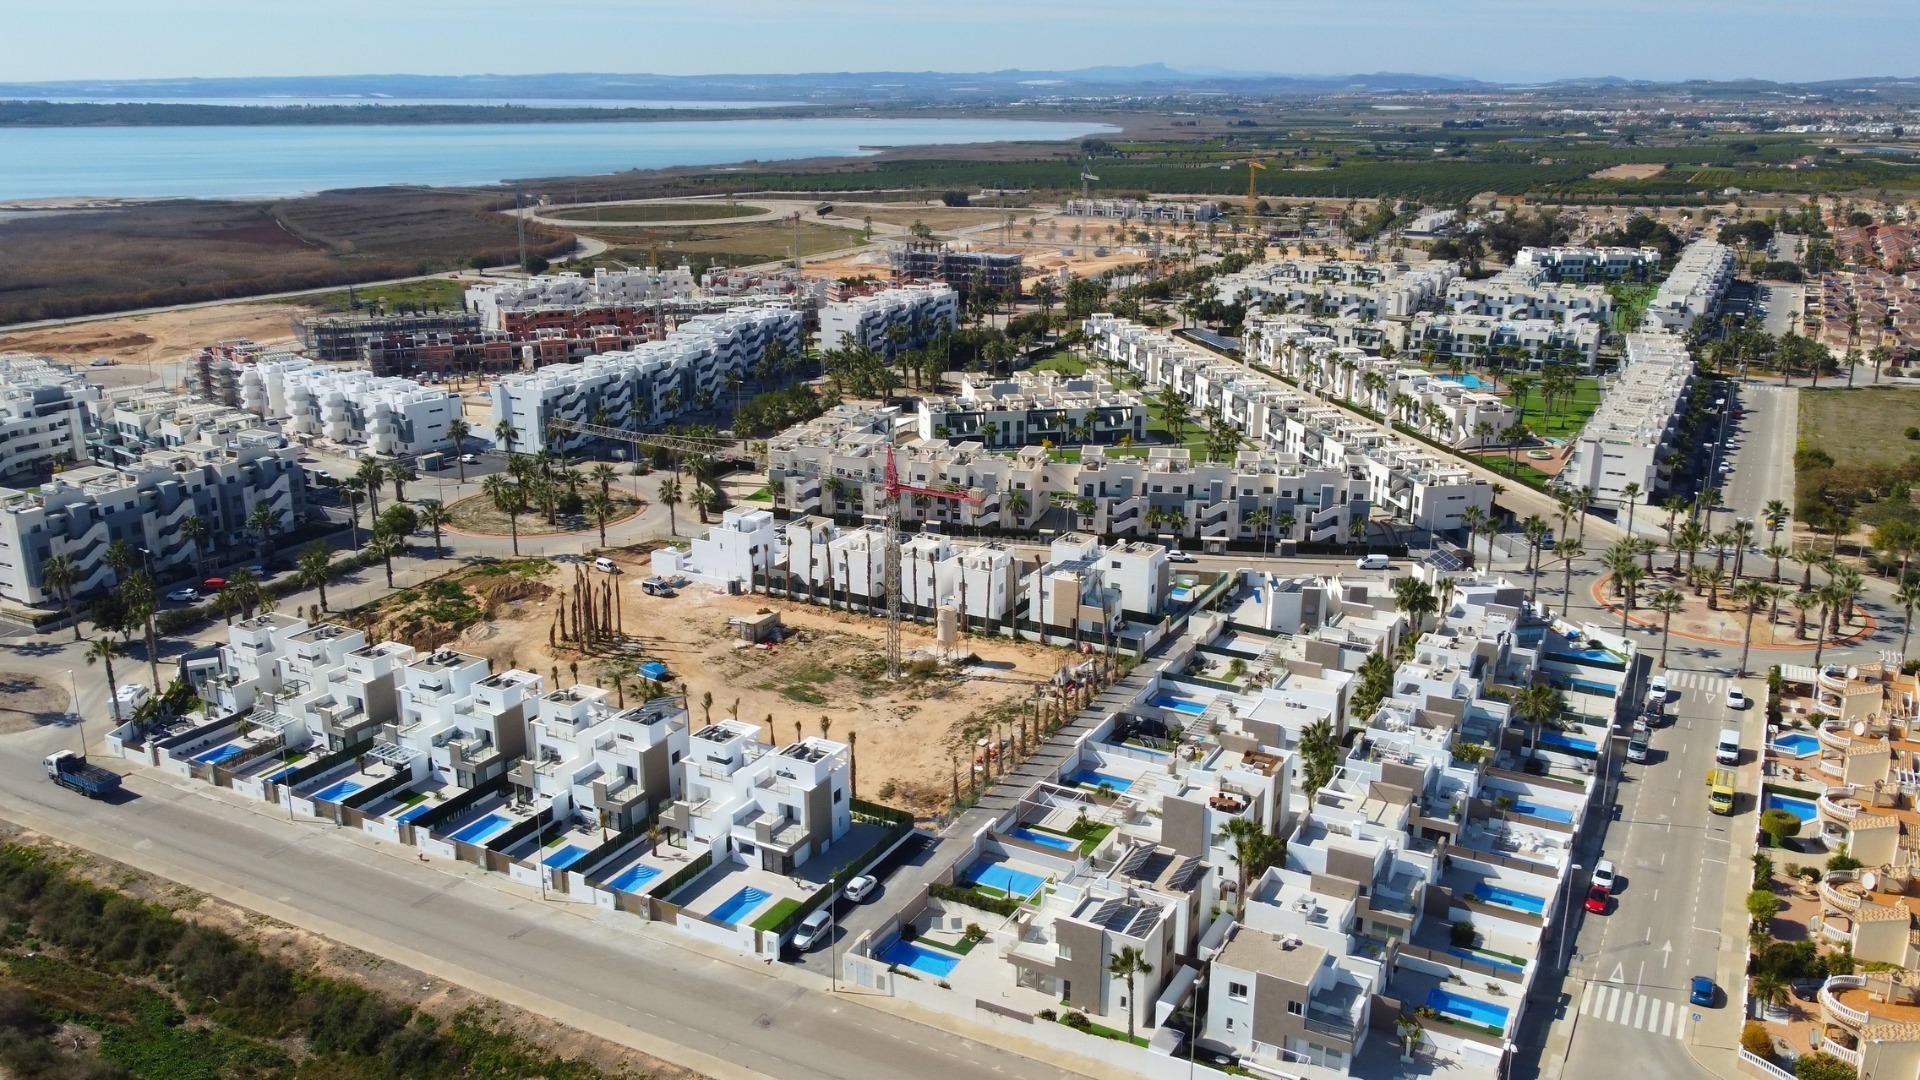 New homes in El Raso, Guardamar del Segura, 2/3 bedrooms, 2 bathrooms, large communal salt water pool, park area with citrus gardens and salt lakes, close to golf course